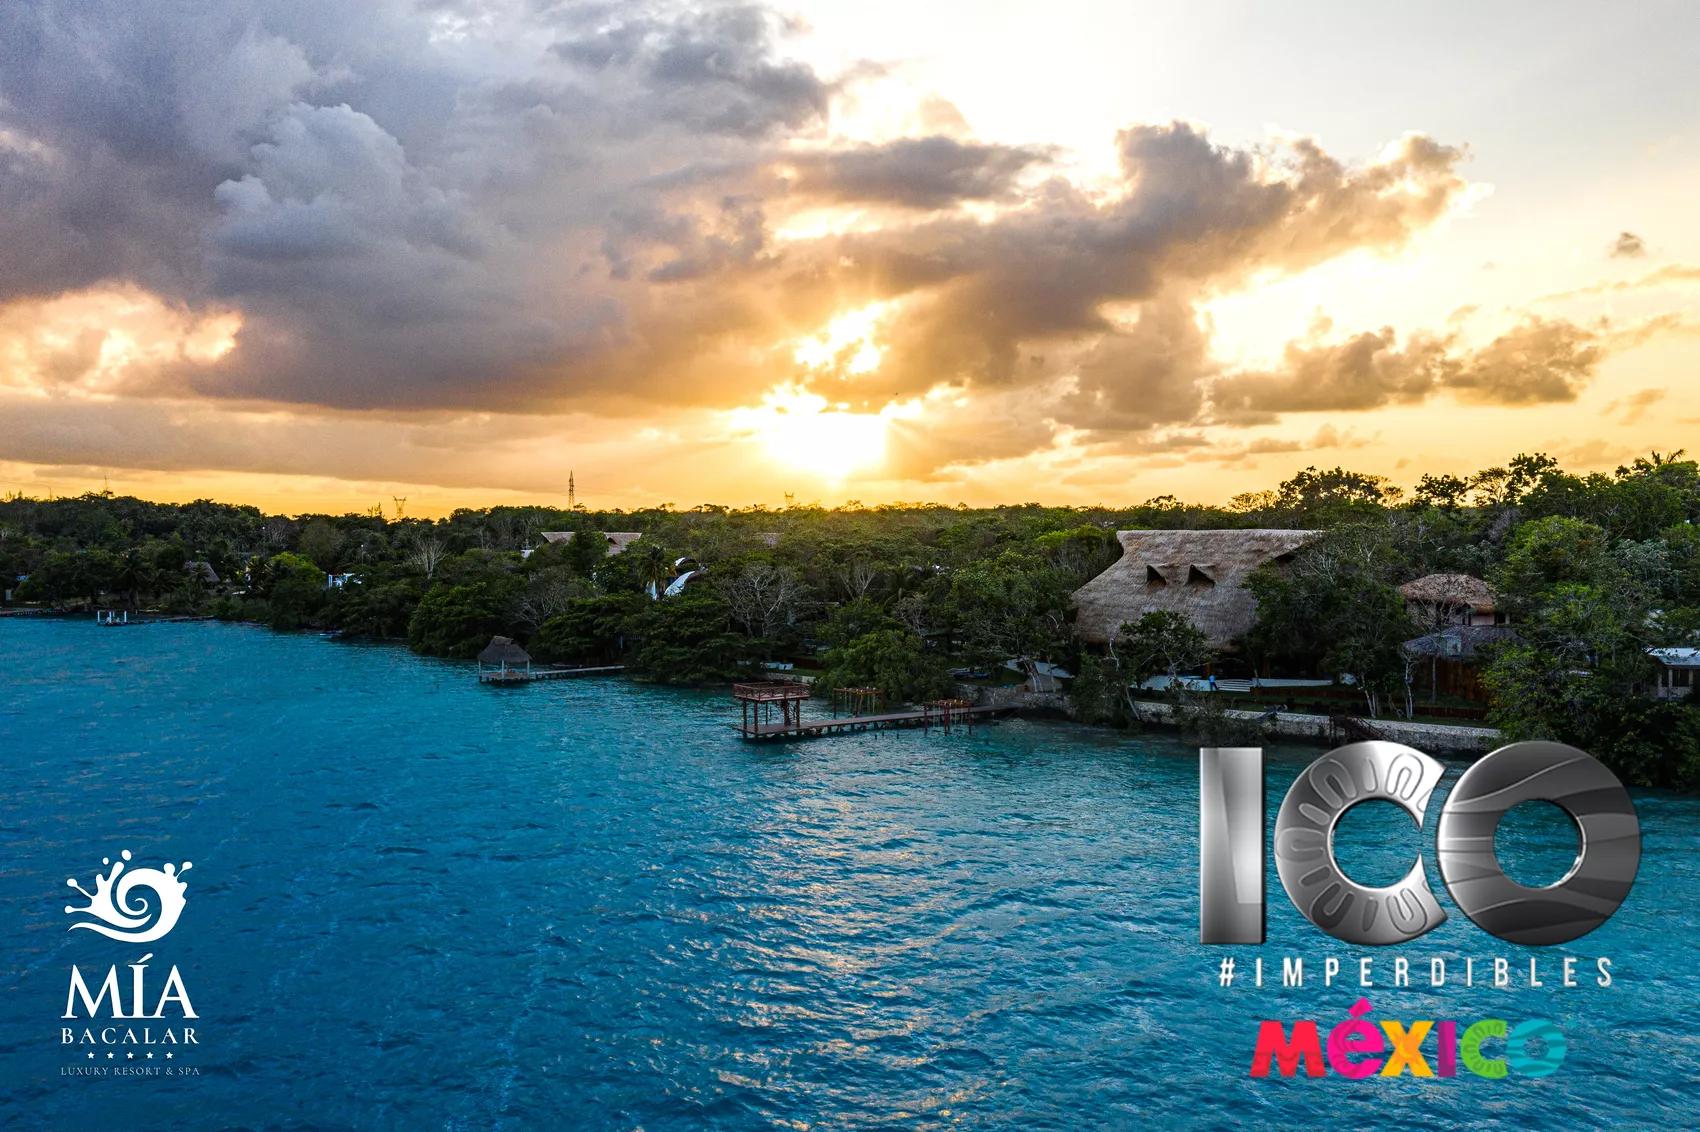 MÍA Bacalar Luxury Resort & Spa triumphs in “The 100 unmissables of Mexico”